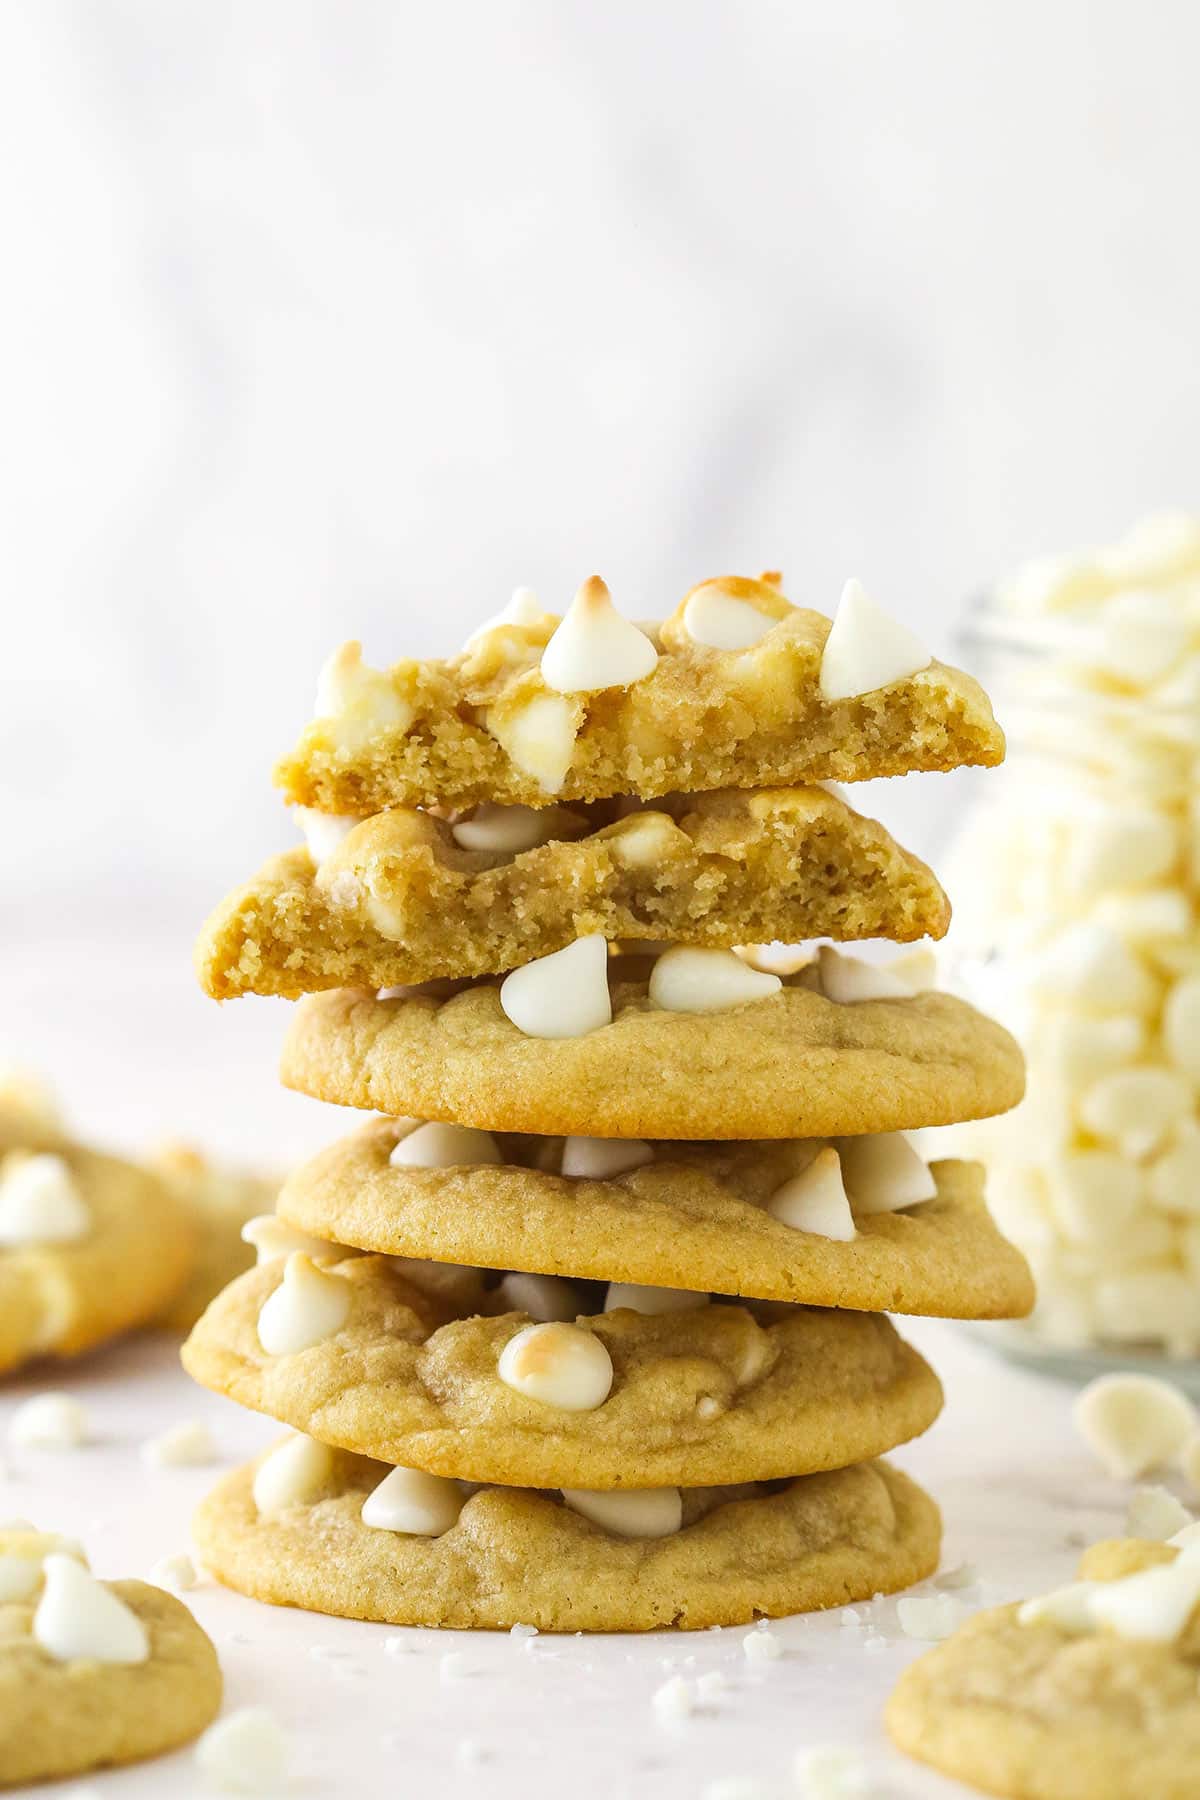 A stack of white chocolate chip cookies surrounded by other white chocolate chip cookies and with the top cookie broken in half.